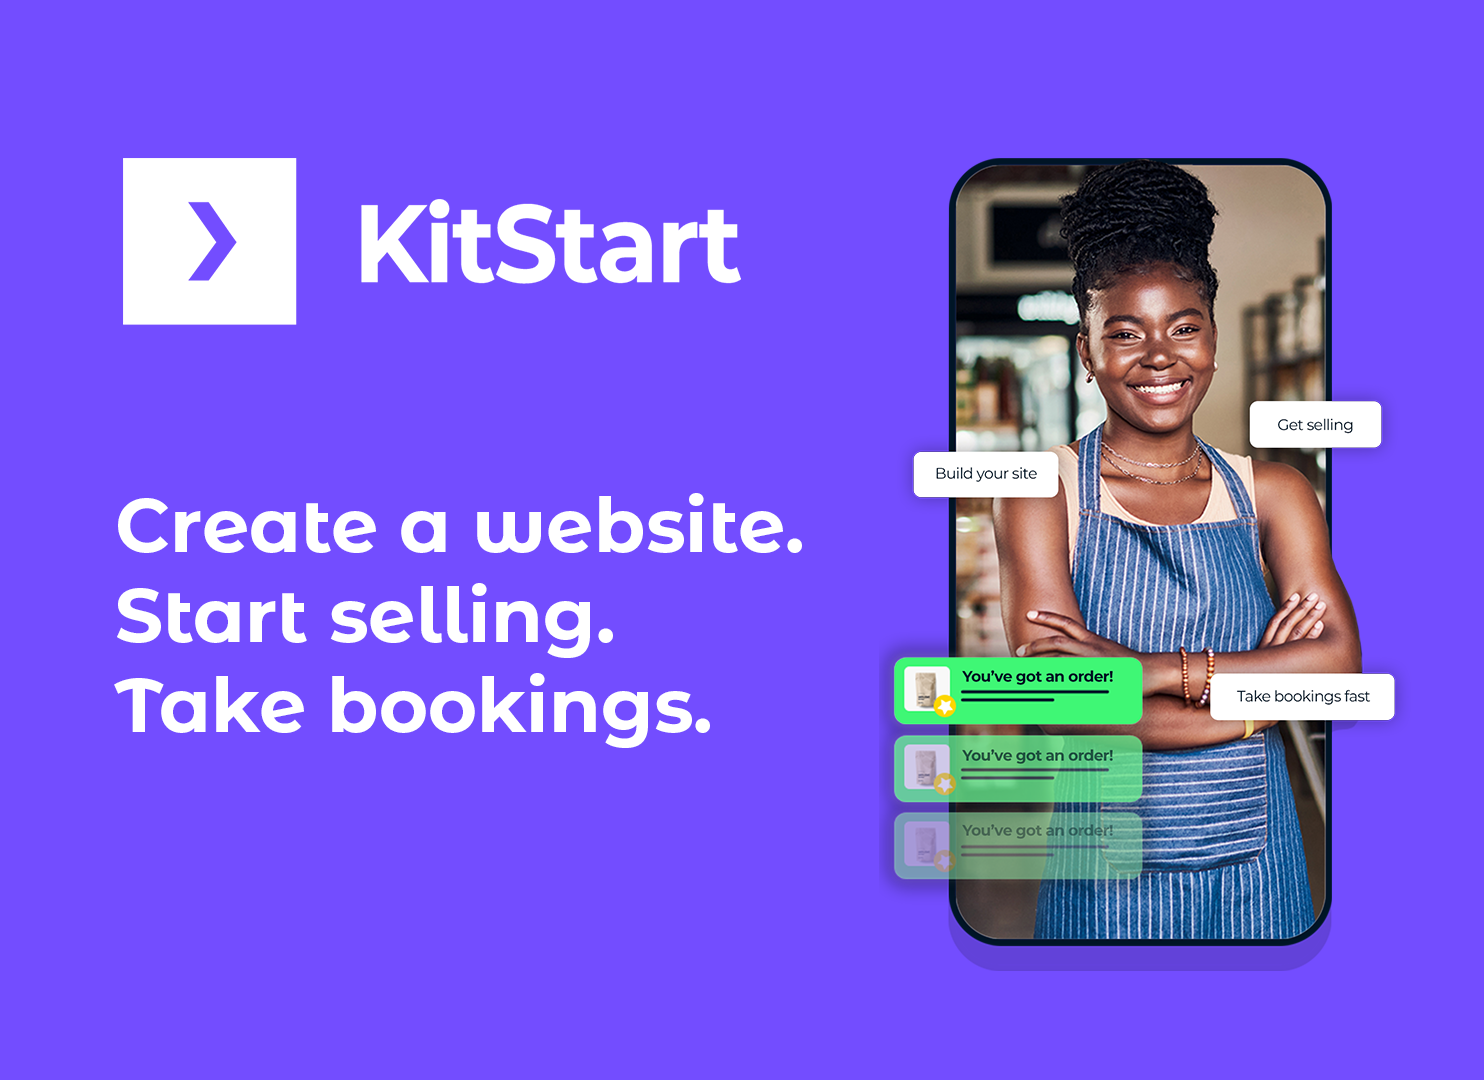 Kick start your business dreams with a new website from KitStart. NCASS members receive an exclusive 20% discount for the first year.